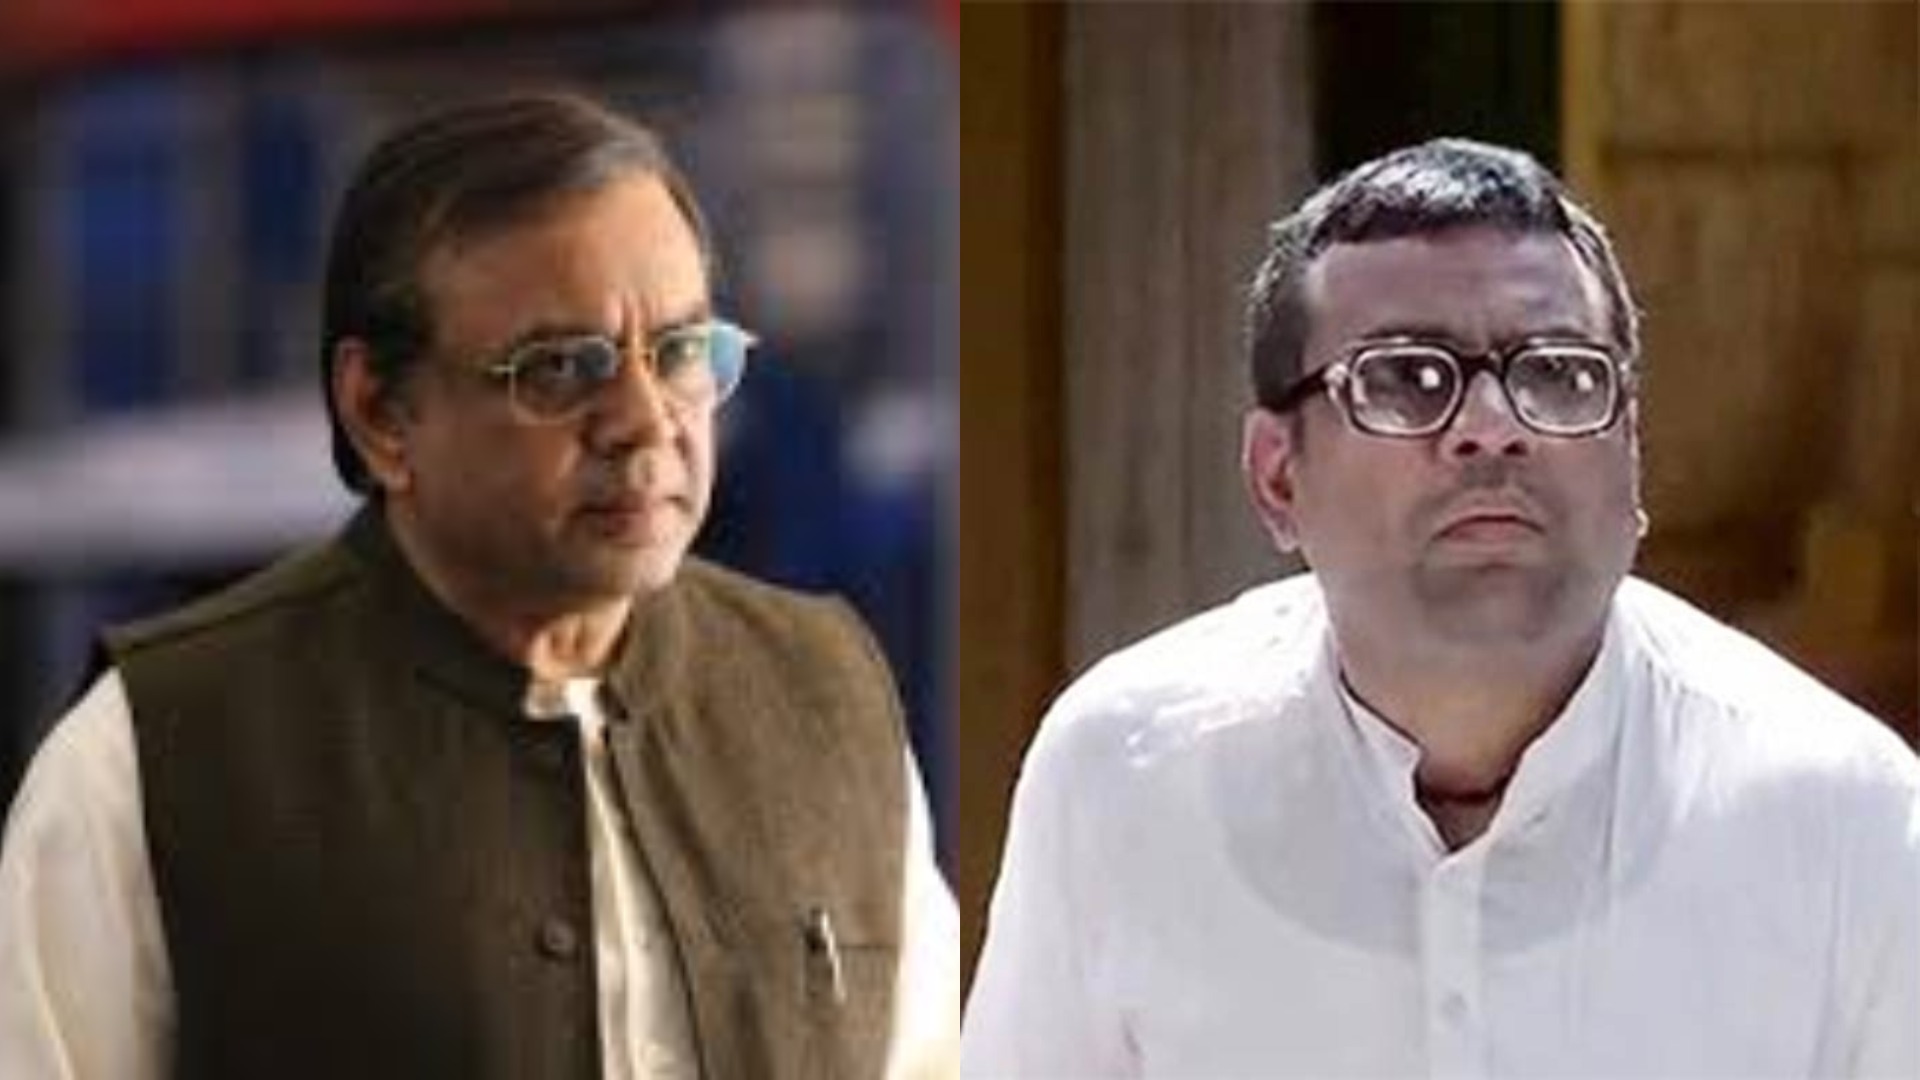 Actor Paresh Rawal’s wife used to live in a hut but won Miss India contest; Read more